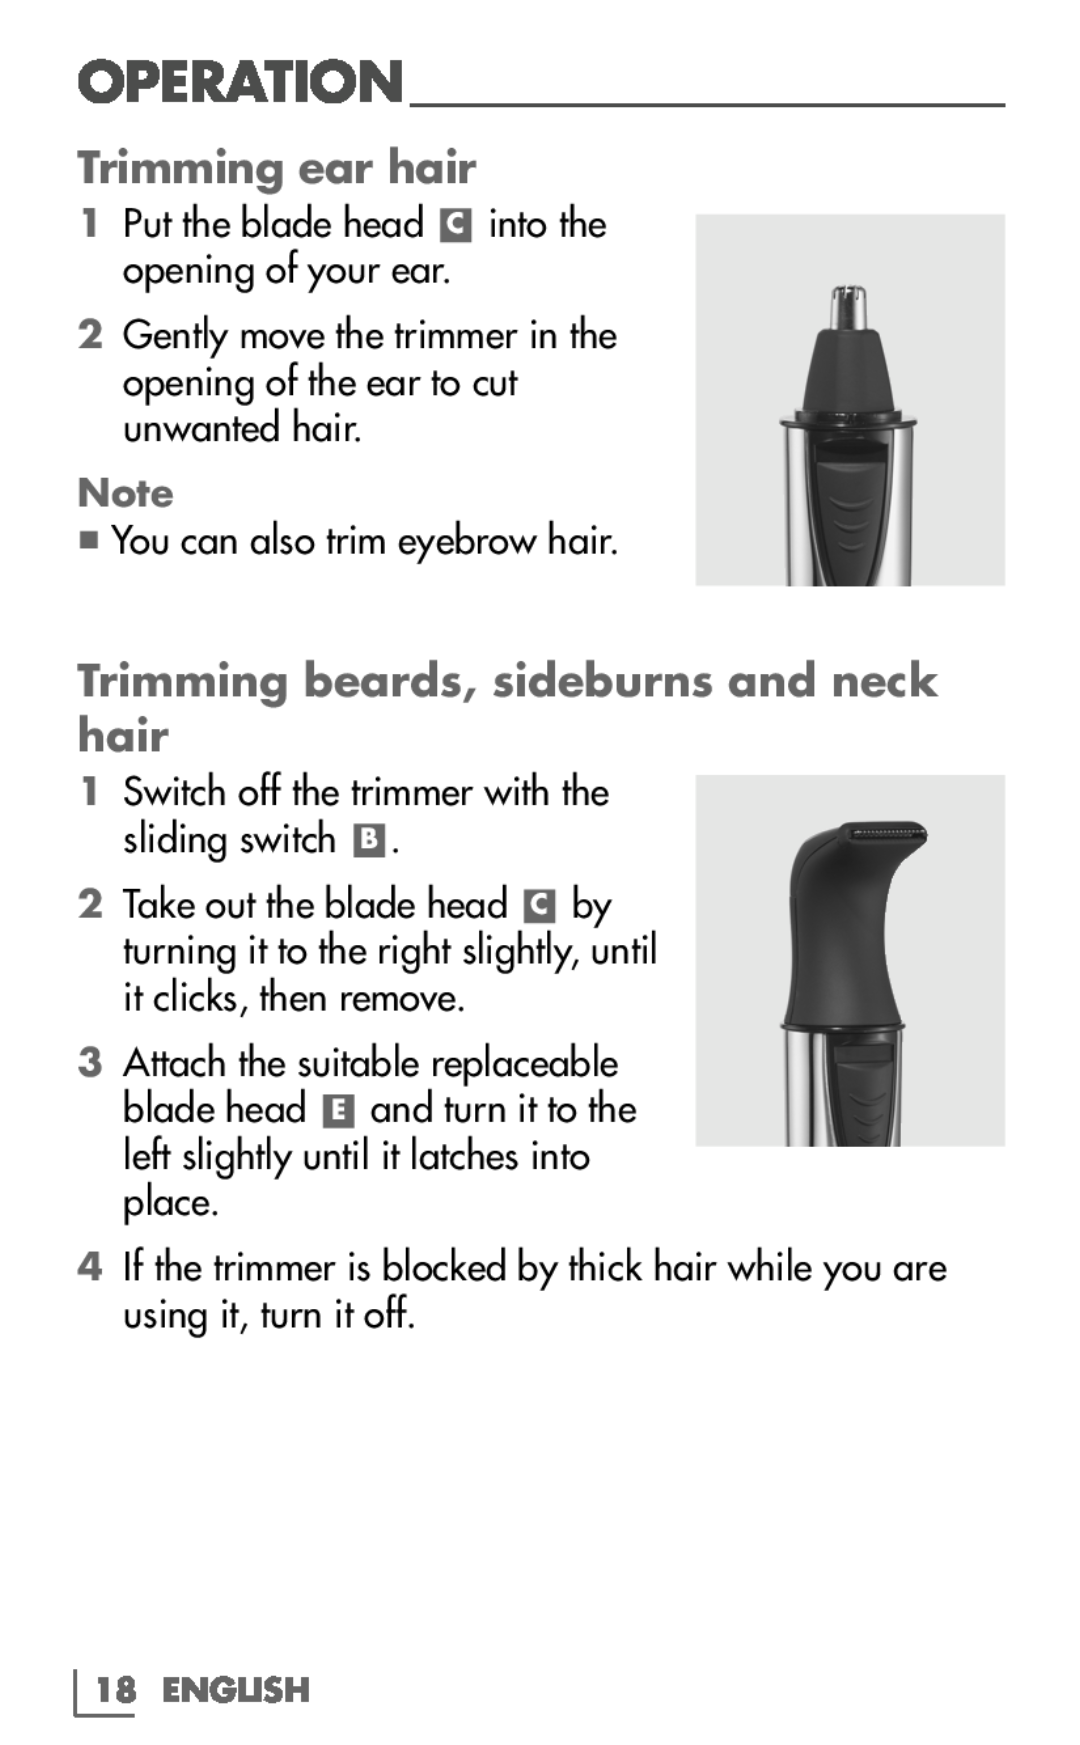 Grundig MT 9610 manual Trimming ear hair, Trimming beards, sideburns and neck hair, Operation 